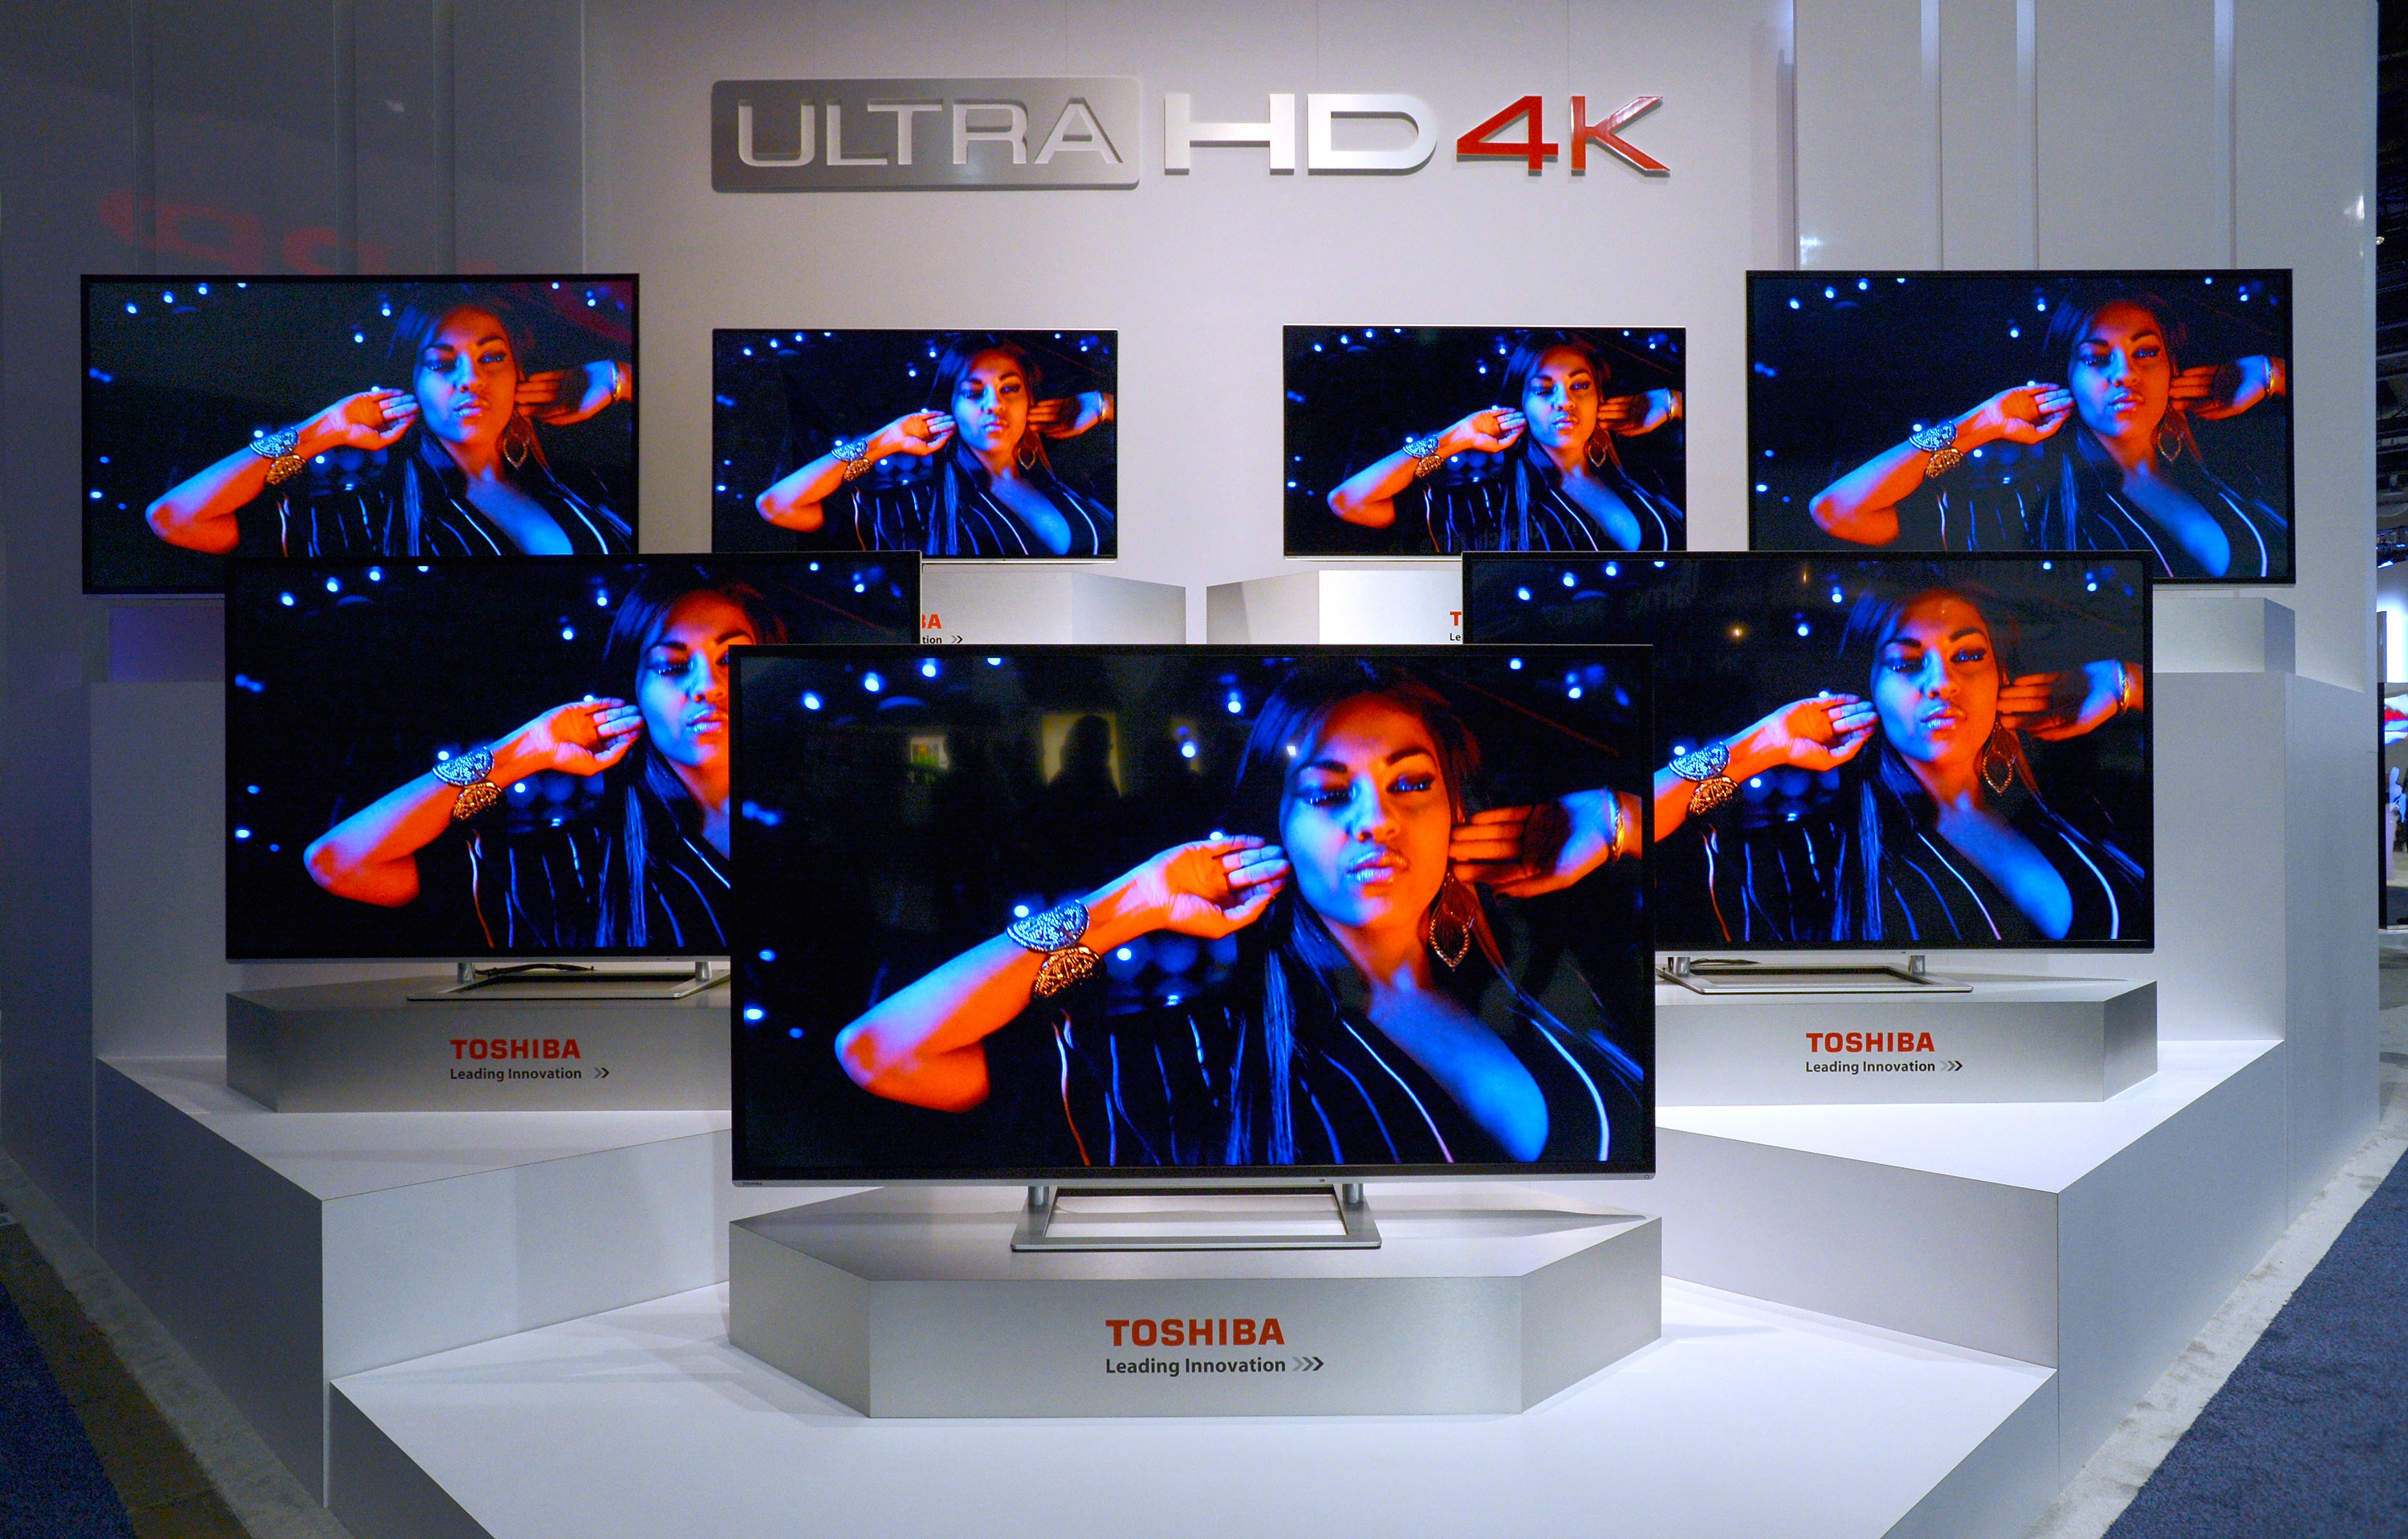 Toshiba Ultra HD 4K televisions are on display at the Toshiba booth at the 2014 International CES at the Las Vegas Convention Center on January 7, 2014 in Las Vegas, Nevada. (David Becker&mdash;Getty Images)